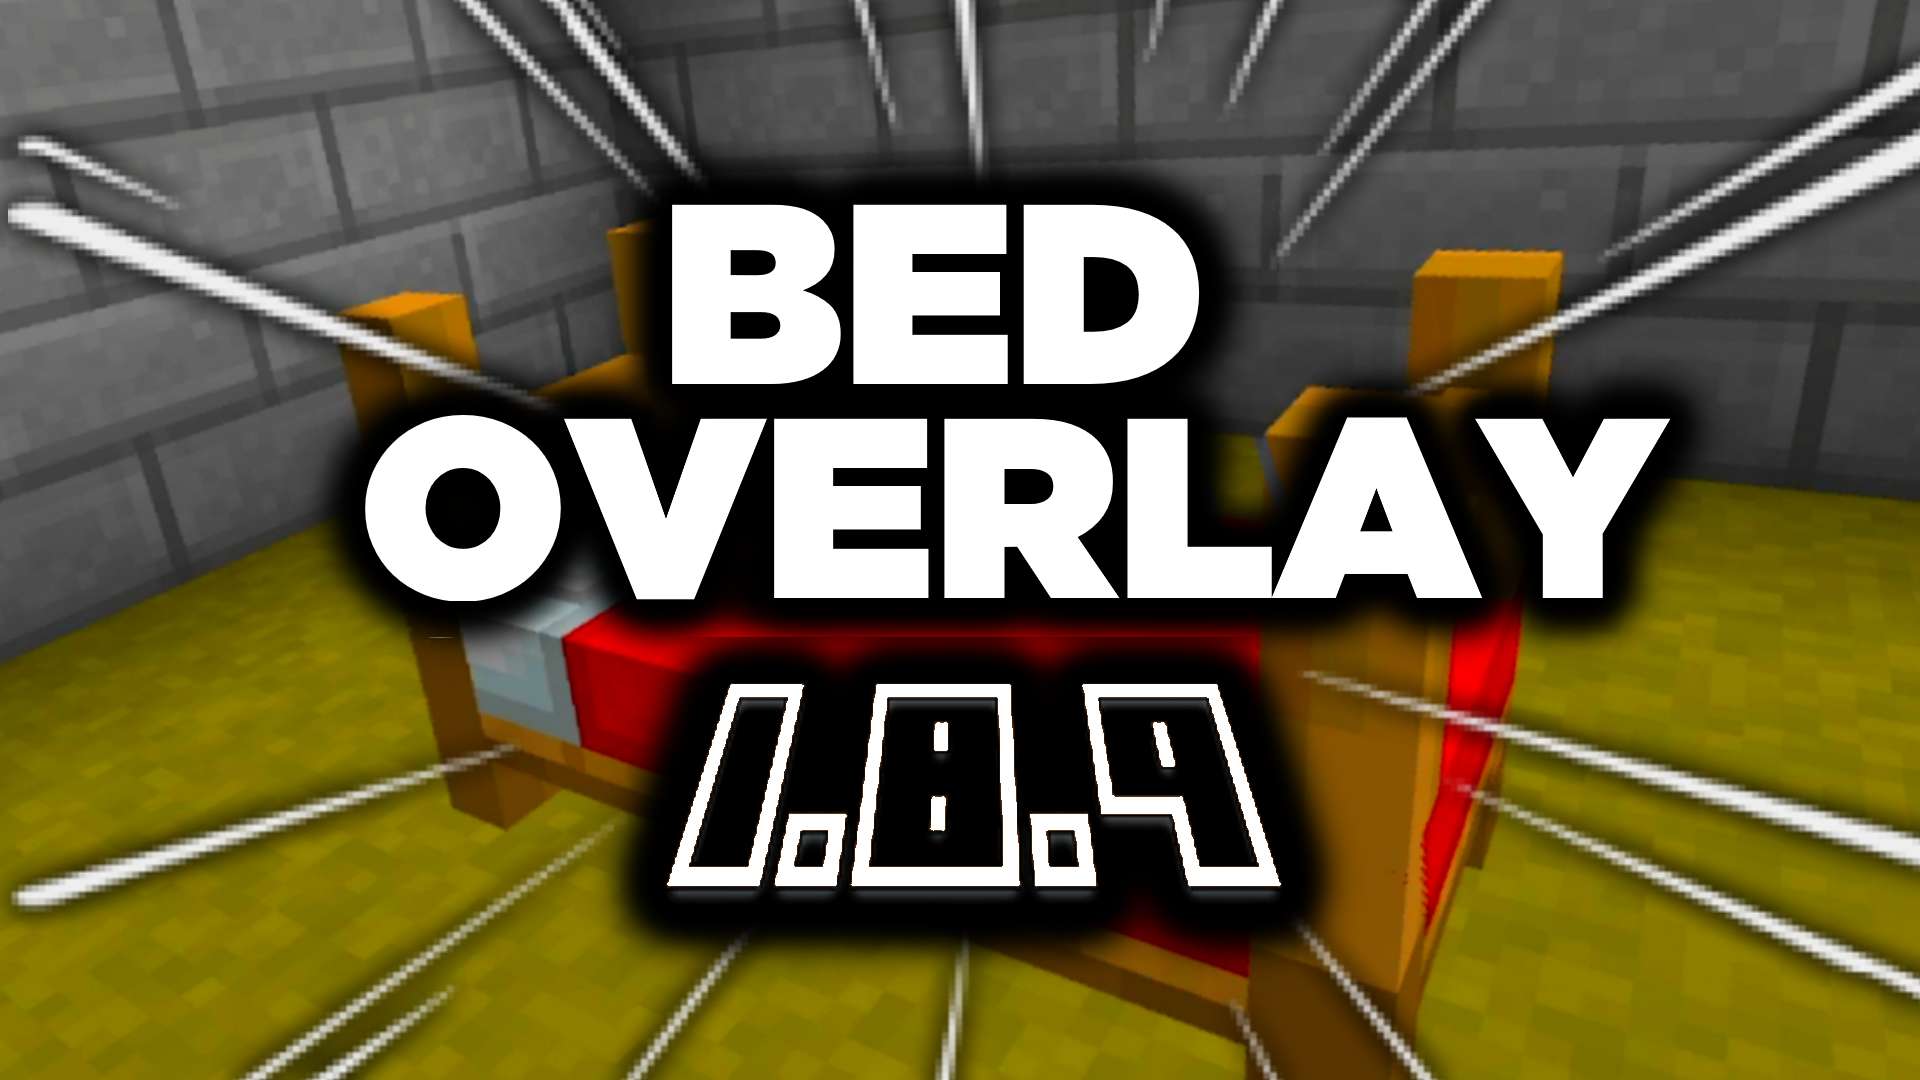 Bed overlay 16 by desat on PvPRP